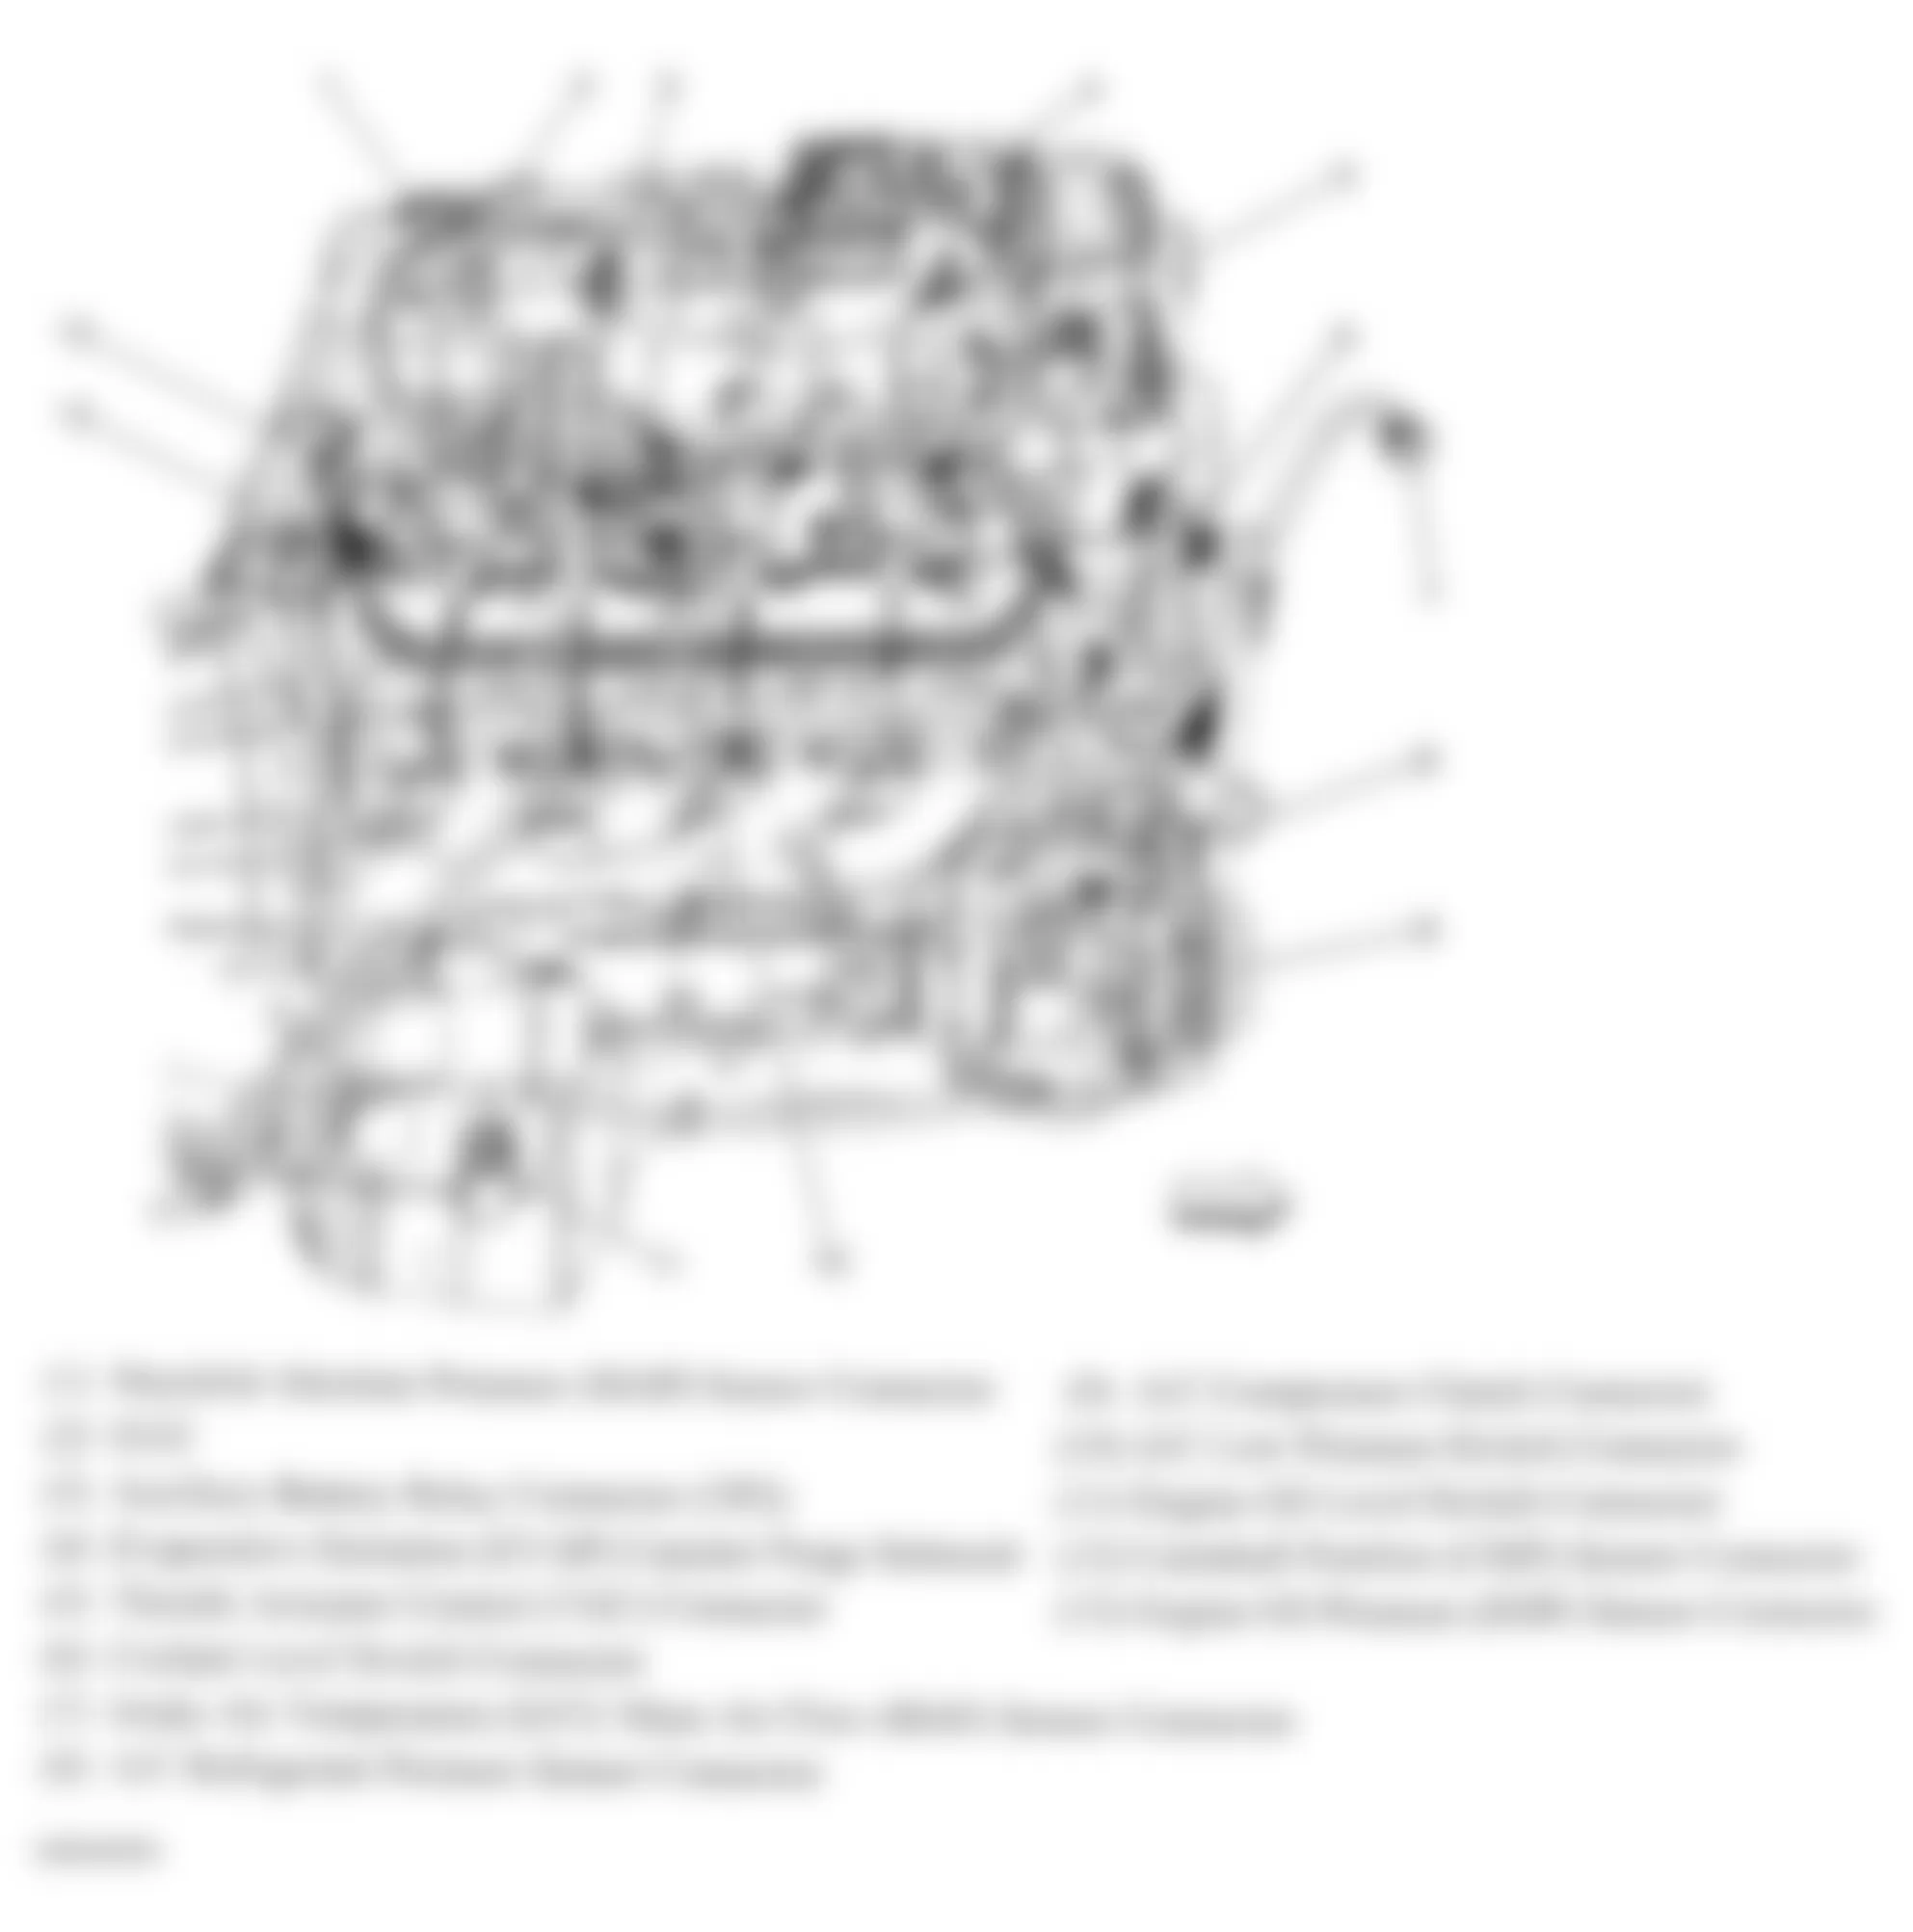 GMC Sierra Classic 3500 2007 - Component Locations -  Right Side Of Engine (4.8L, 5.3L & 6.0L)